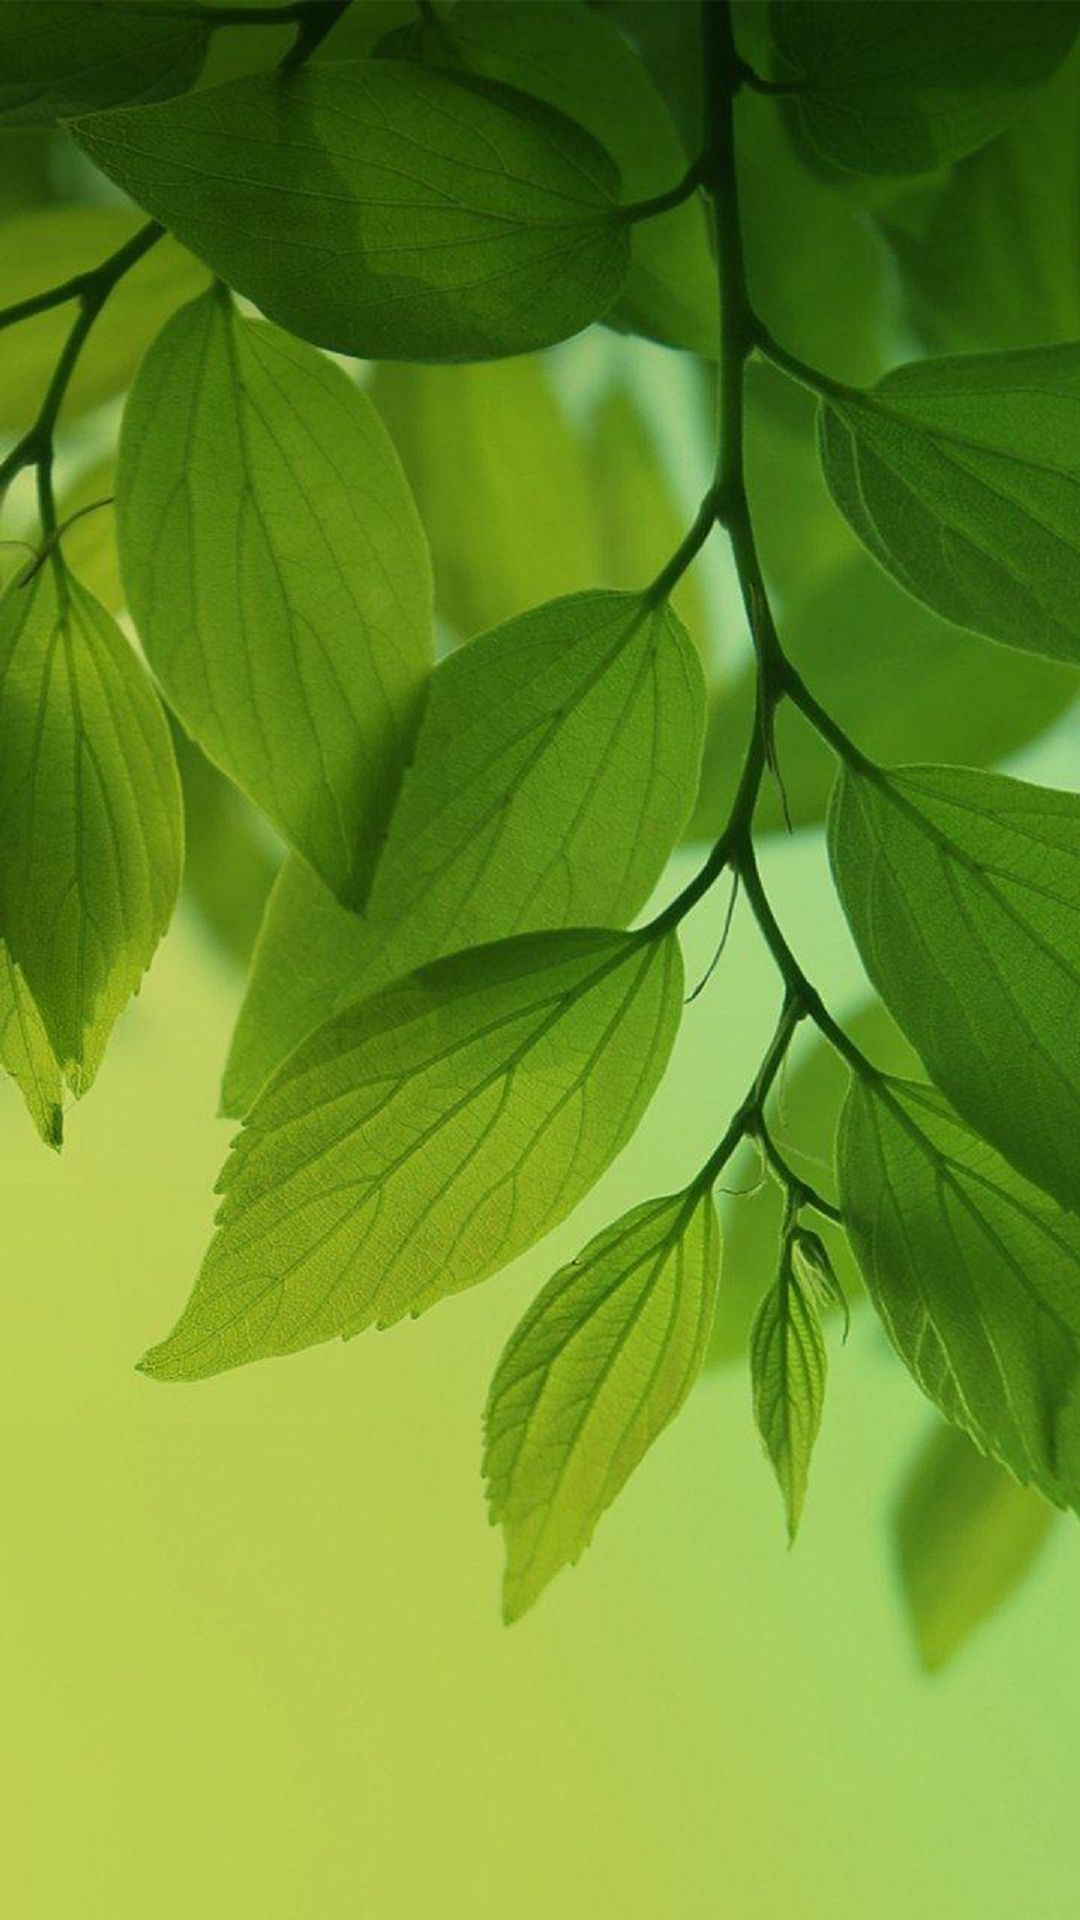 Fresh green leaves htc one wallpaper - Best htc one wallpapers